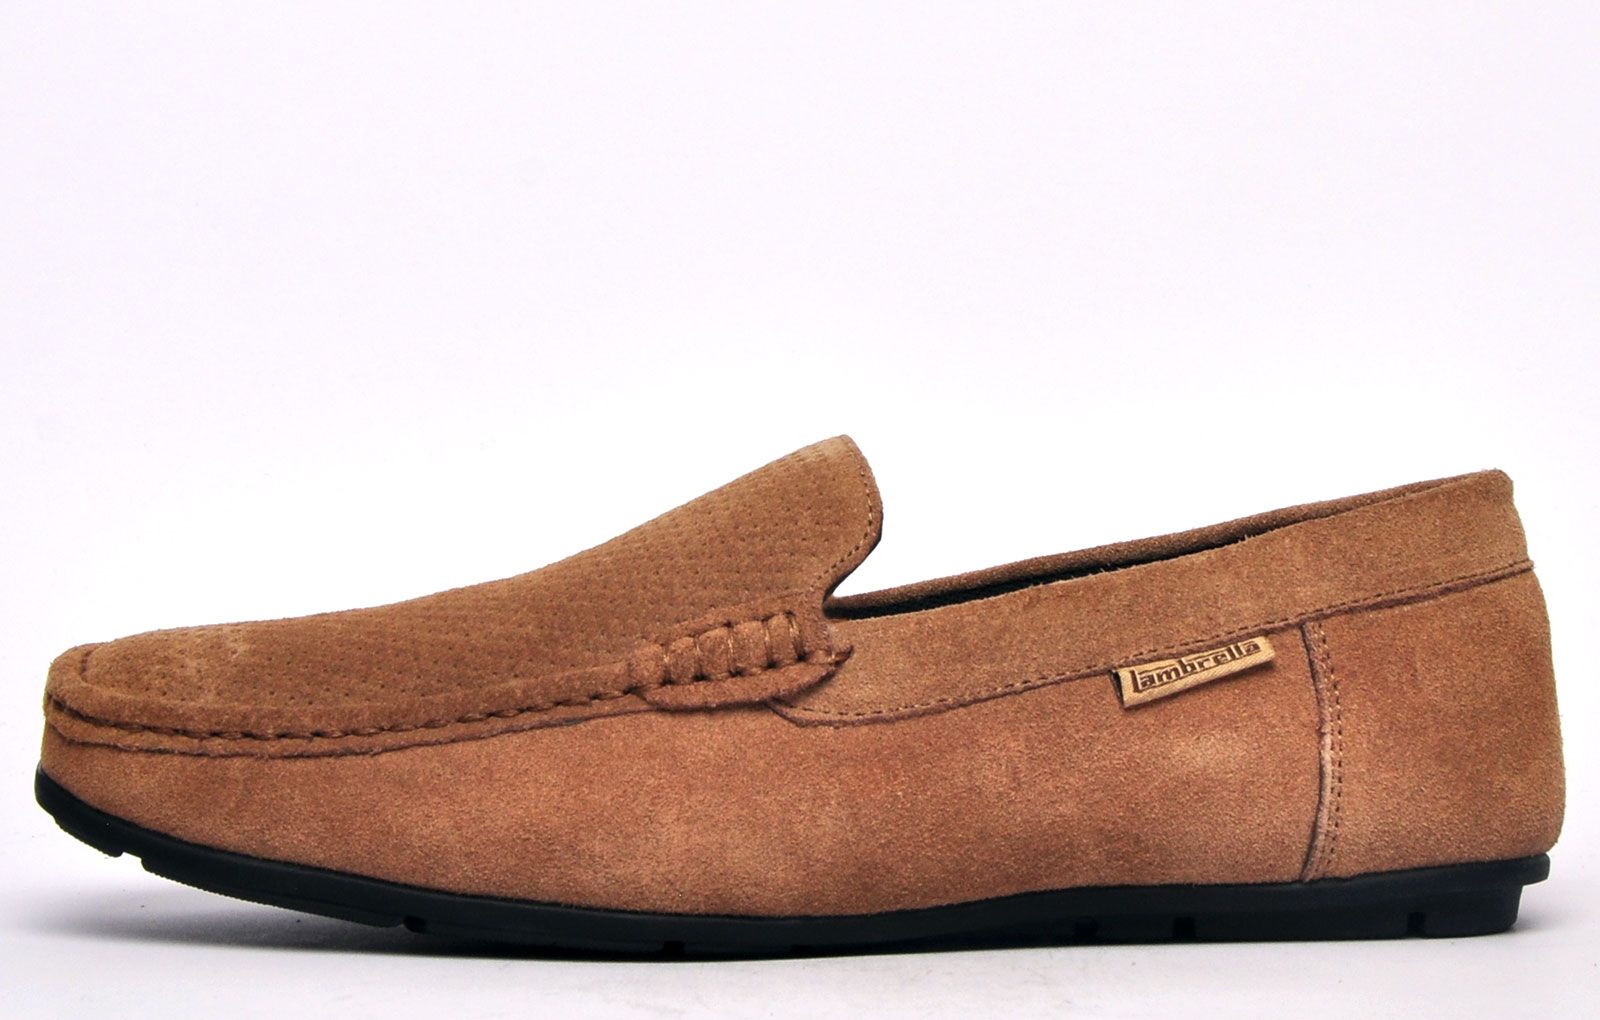 An essential for the fashion-conscious gent, these Scoot mens Lambretta suede leather loafers are a true wardrobe staple. Boasting effortless charm, these mens slip-ons are presented in a brown suede leather upper ensuring a quality finish that will compliment any outfit. A hardwearing rubber outsole ensures grip and durability on a variety of surfaces, ensuring long lasting wear that wont let you down.
 Versatile in nature, the Scoot can be easily dressed up for those more formal occasions or teamed up with any smart casual attire for the ultimate sophisticated look.
 - Premium suede leather upper
 - Designer stitch detailing throughout 
 - Durable grippy outsole 
 - Easy slip on / off